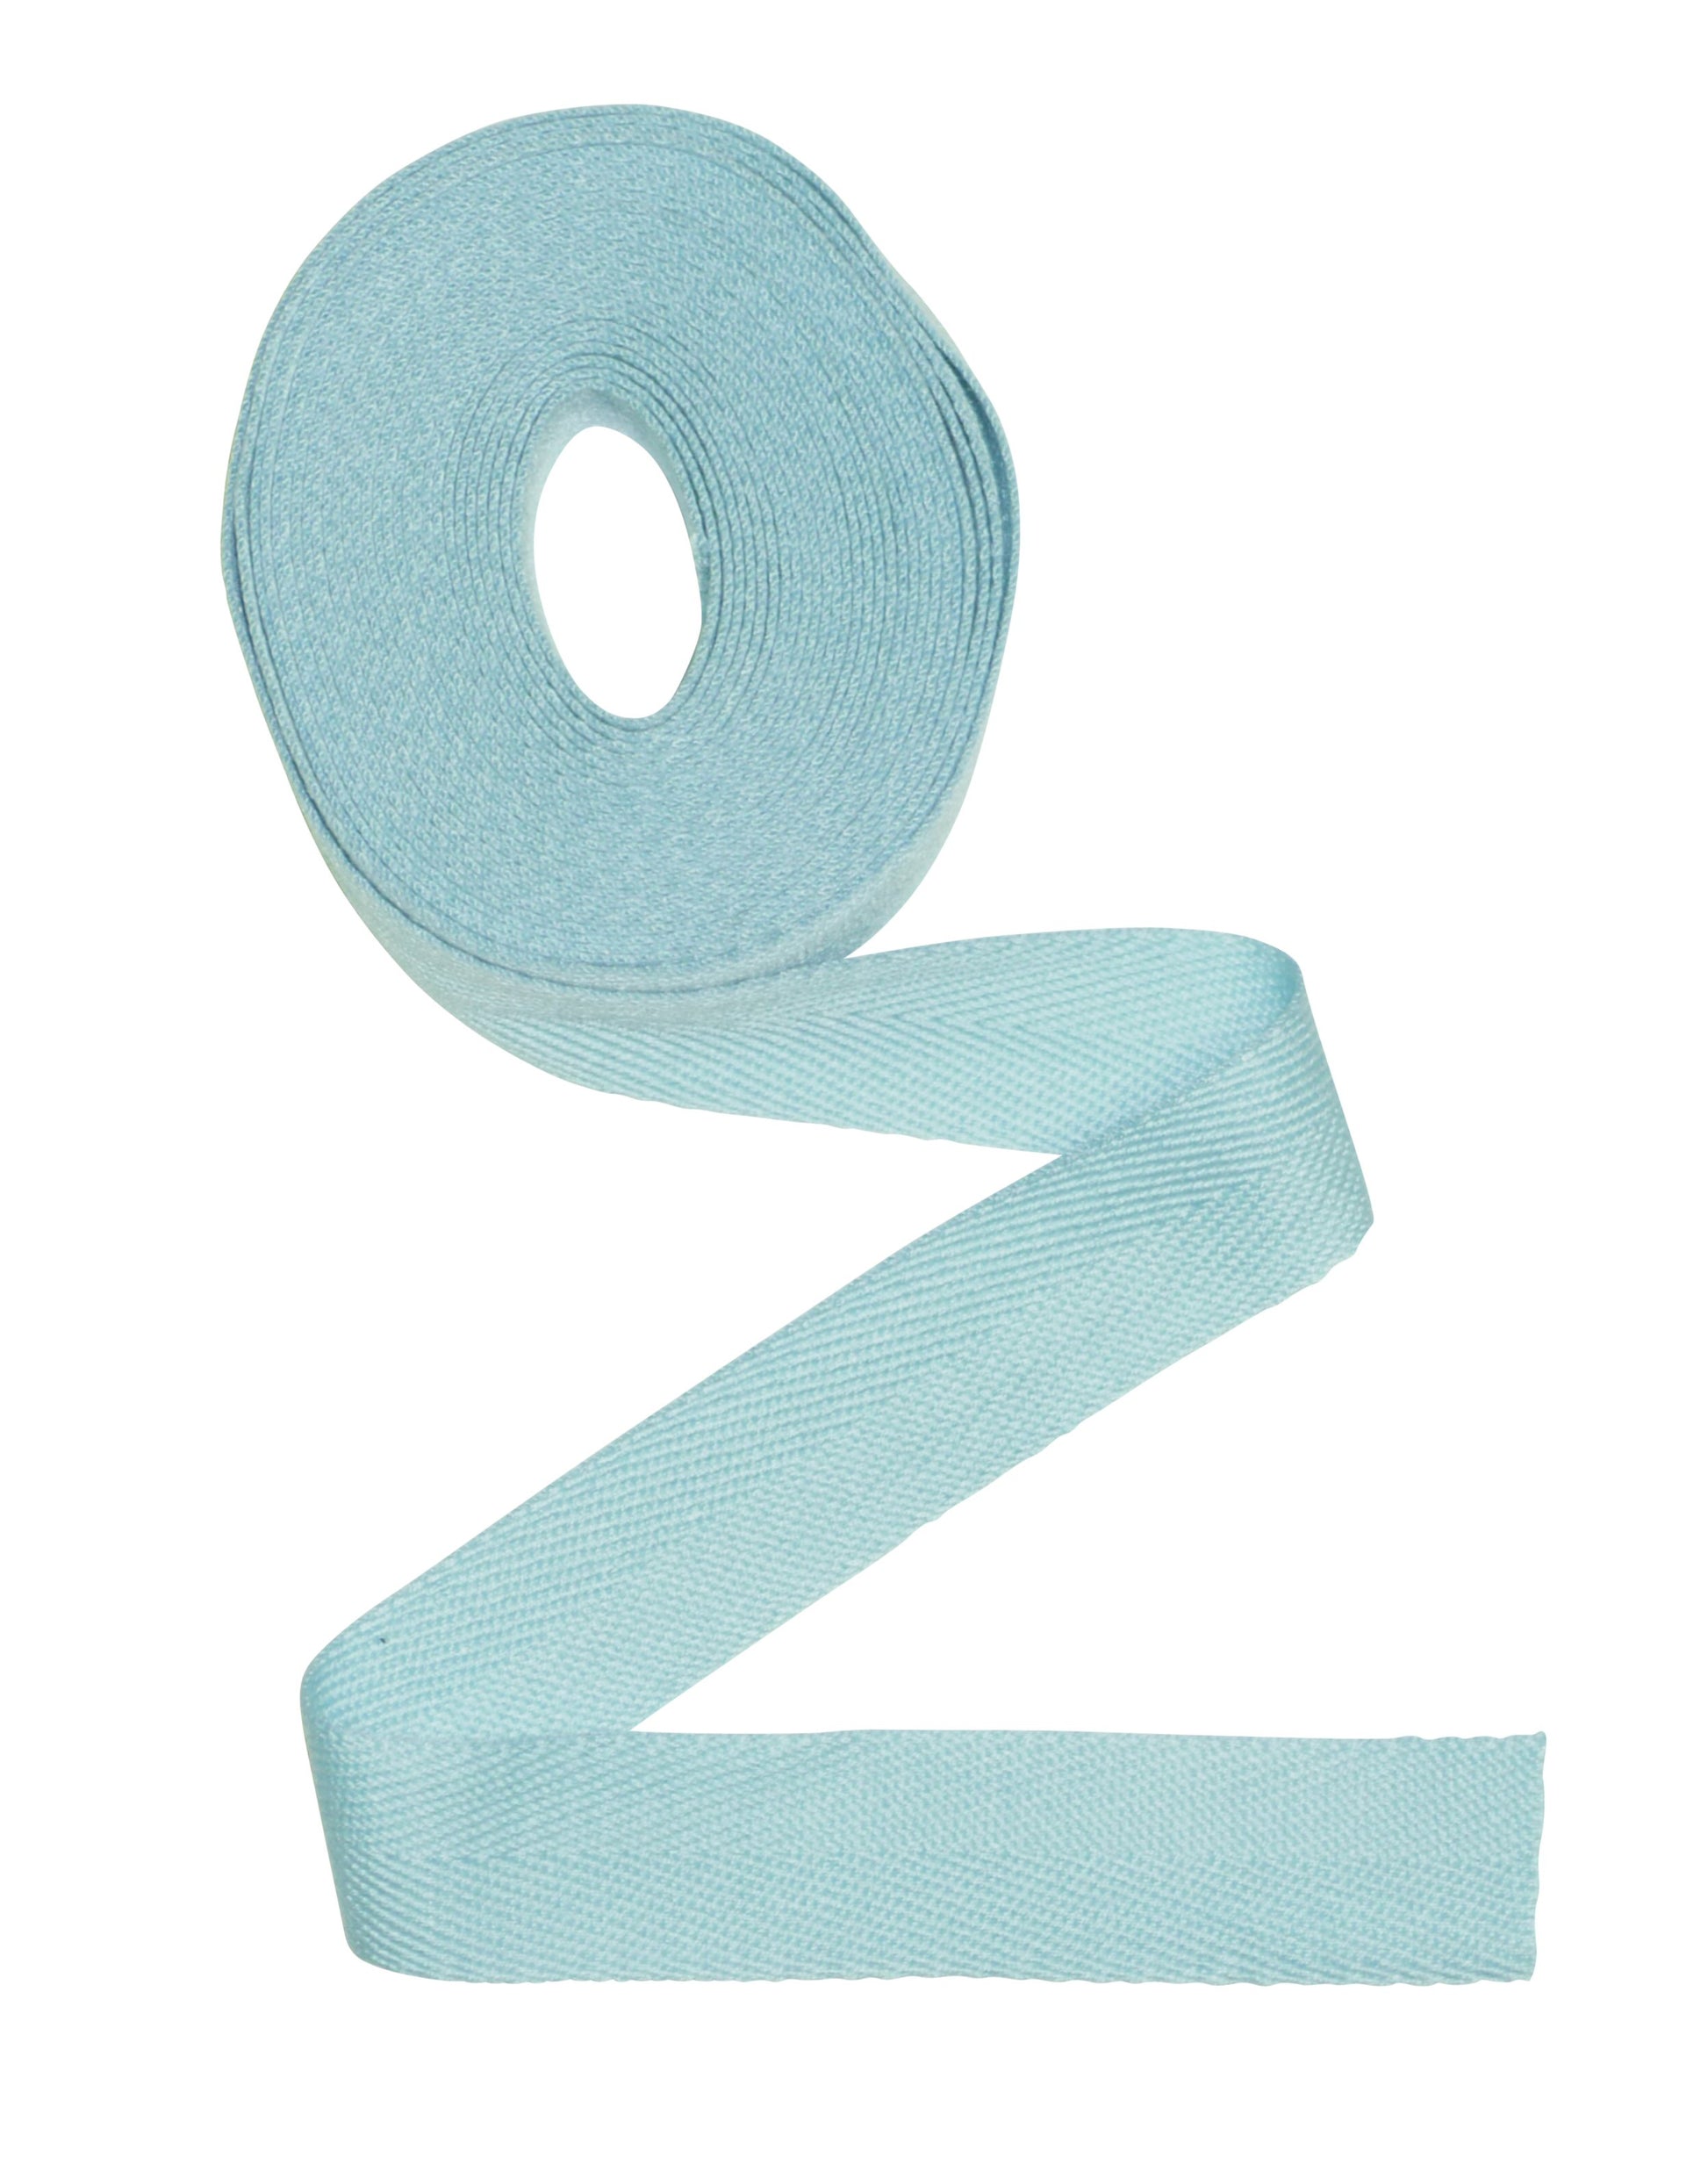 Benristraps 25mm Acrylic Twill Tape, 5 Metre Length in baby blue